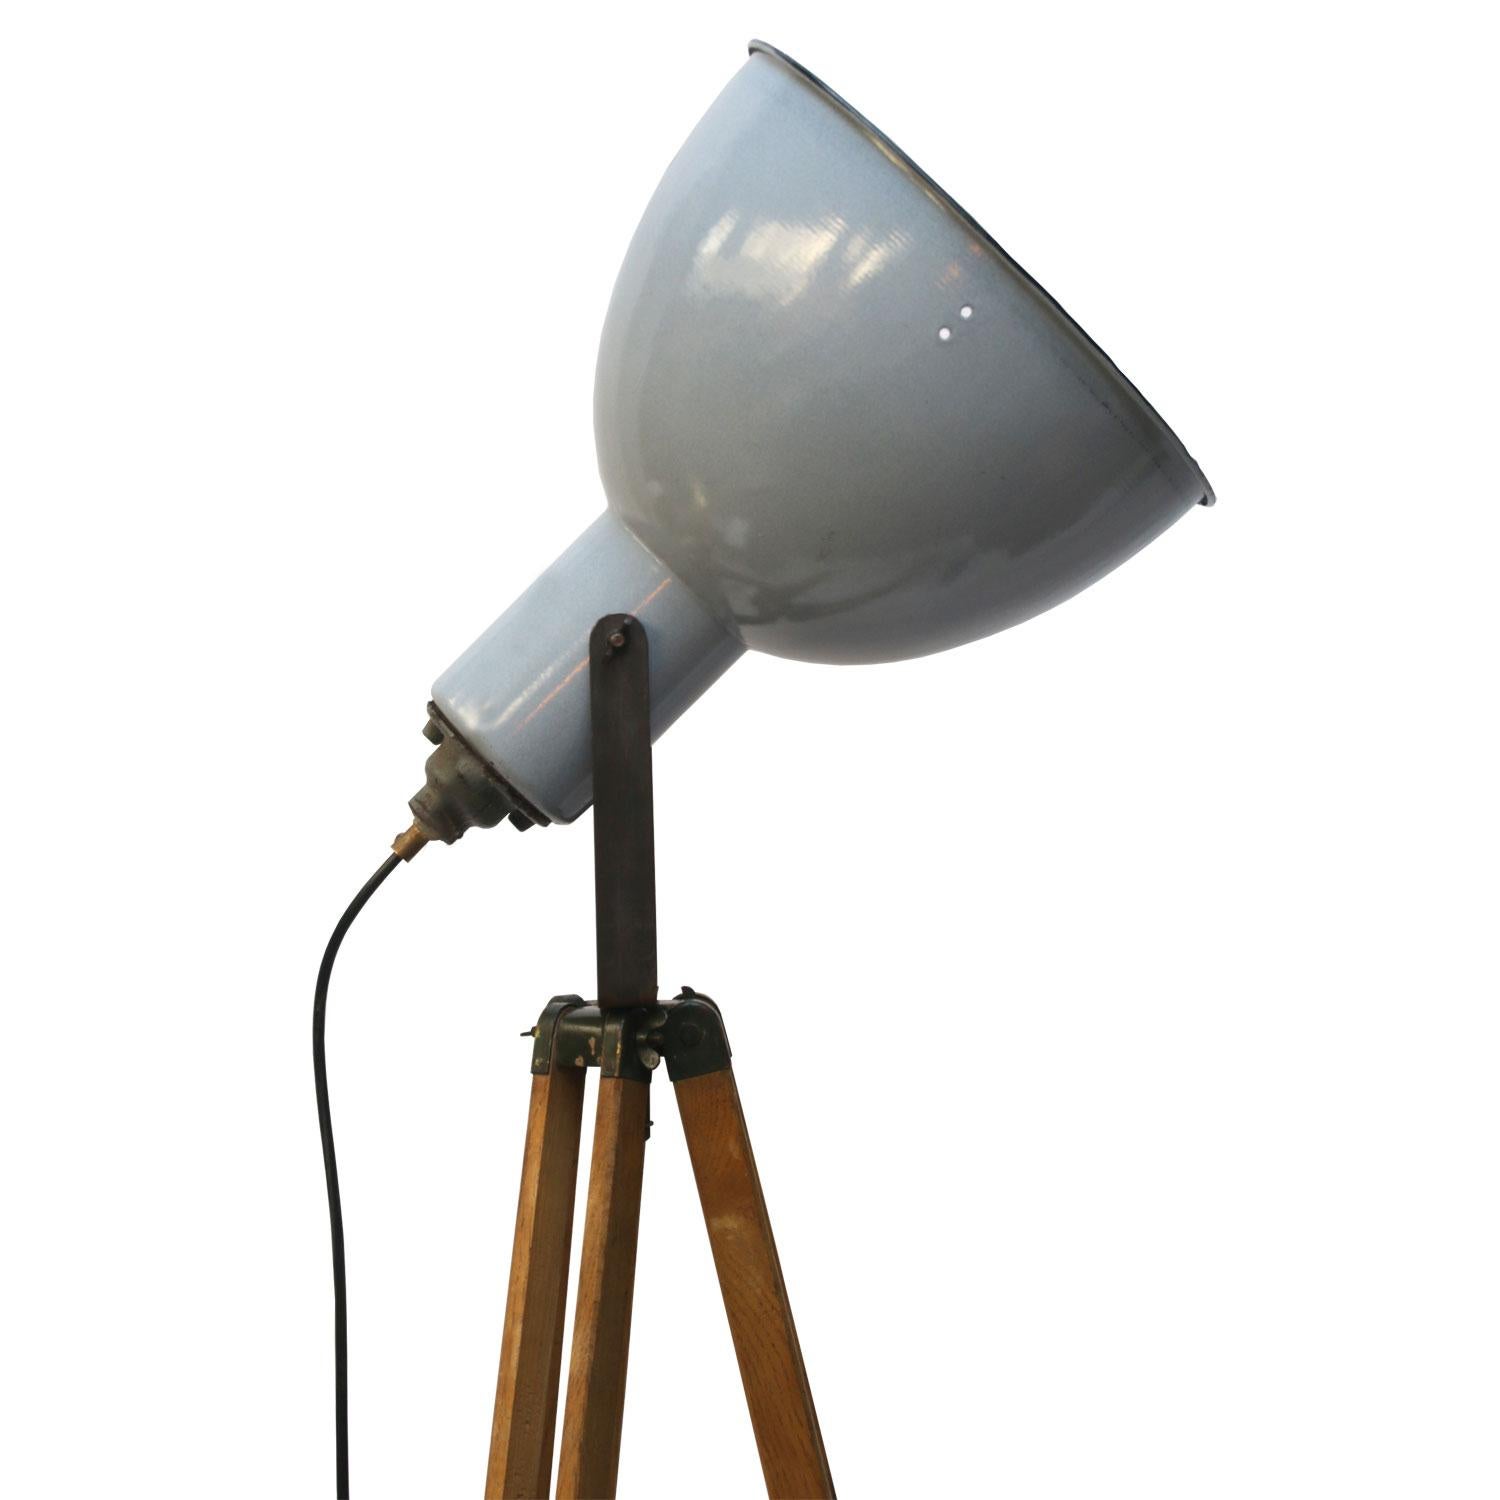 Wooden Tripod Gray Enamel Vintage Industrial Spot Light Floor Lamps In Good Condition For Sale In Amsterdam, NL